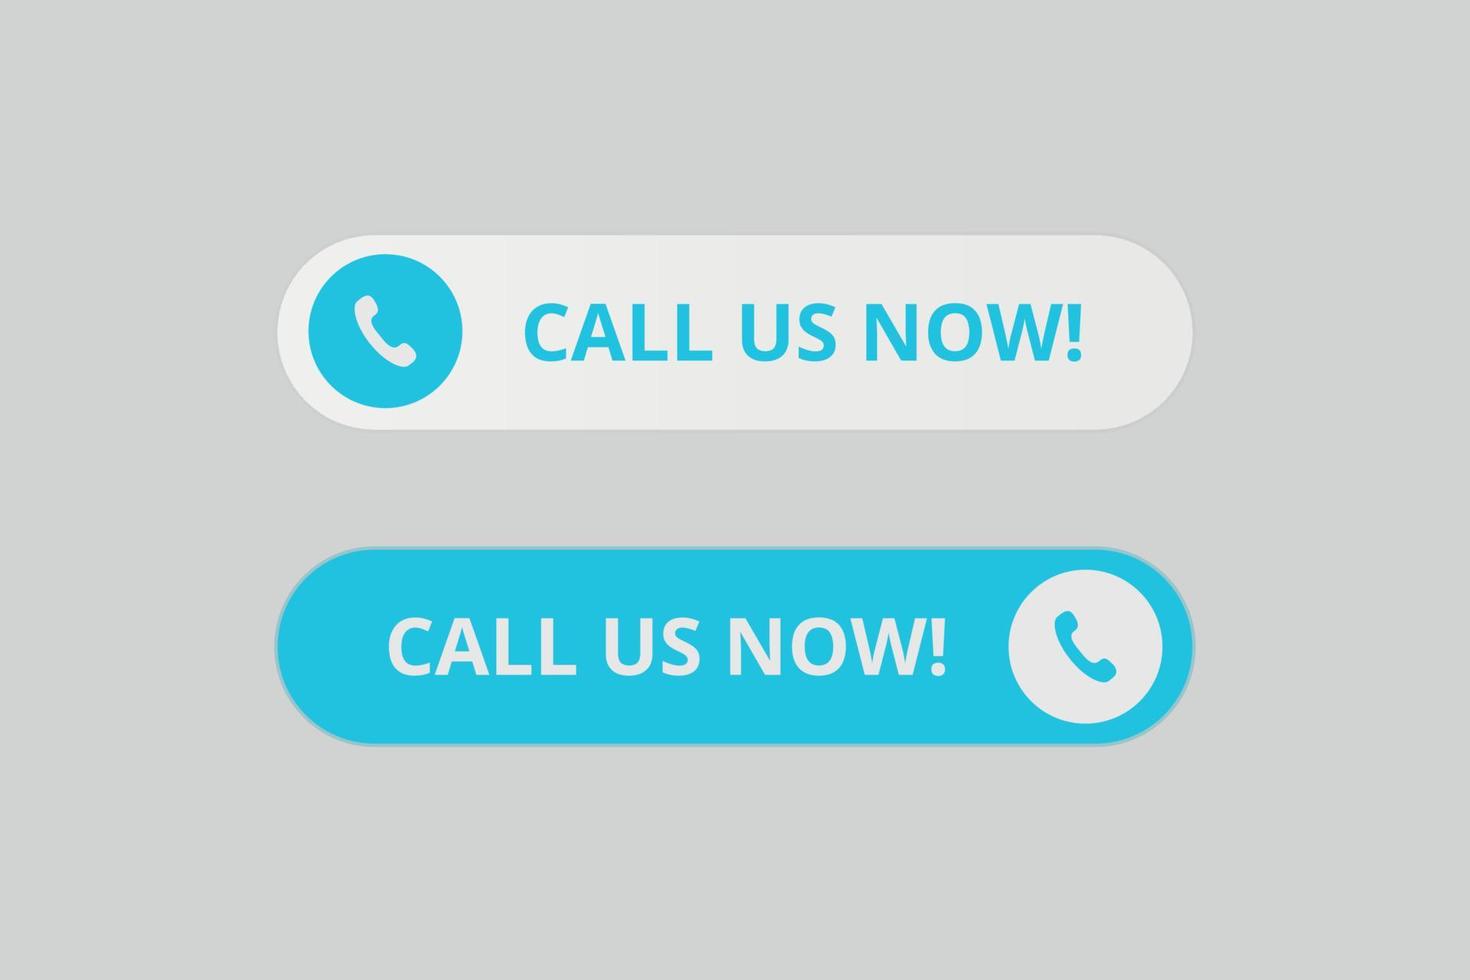 Set of call us now buttons with call icon vector